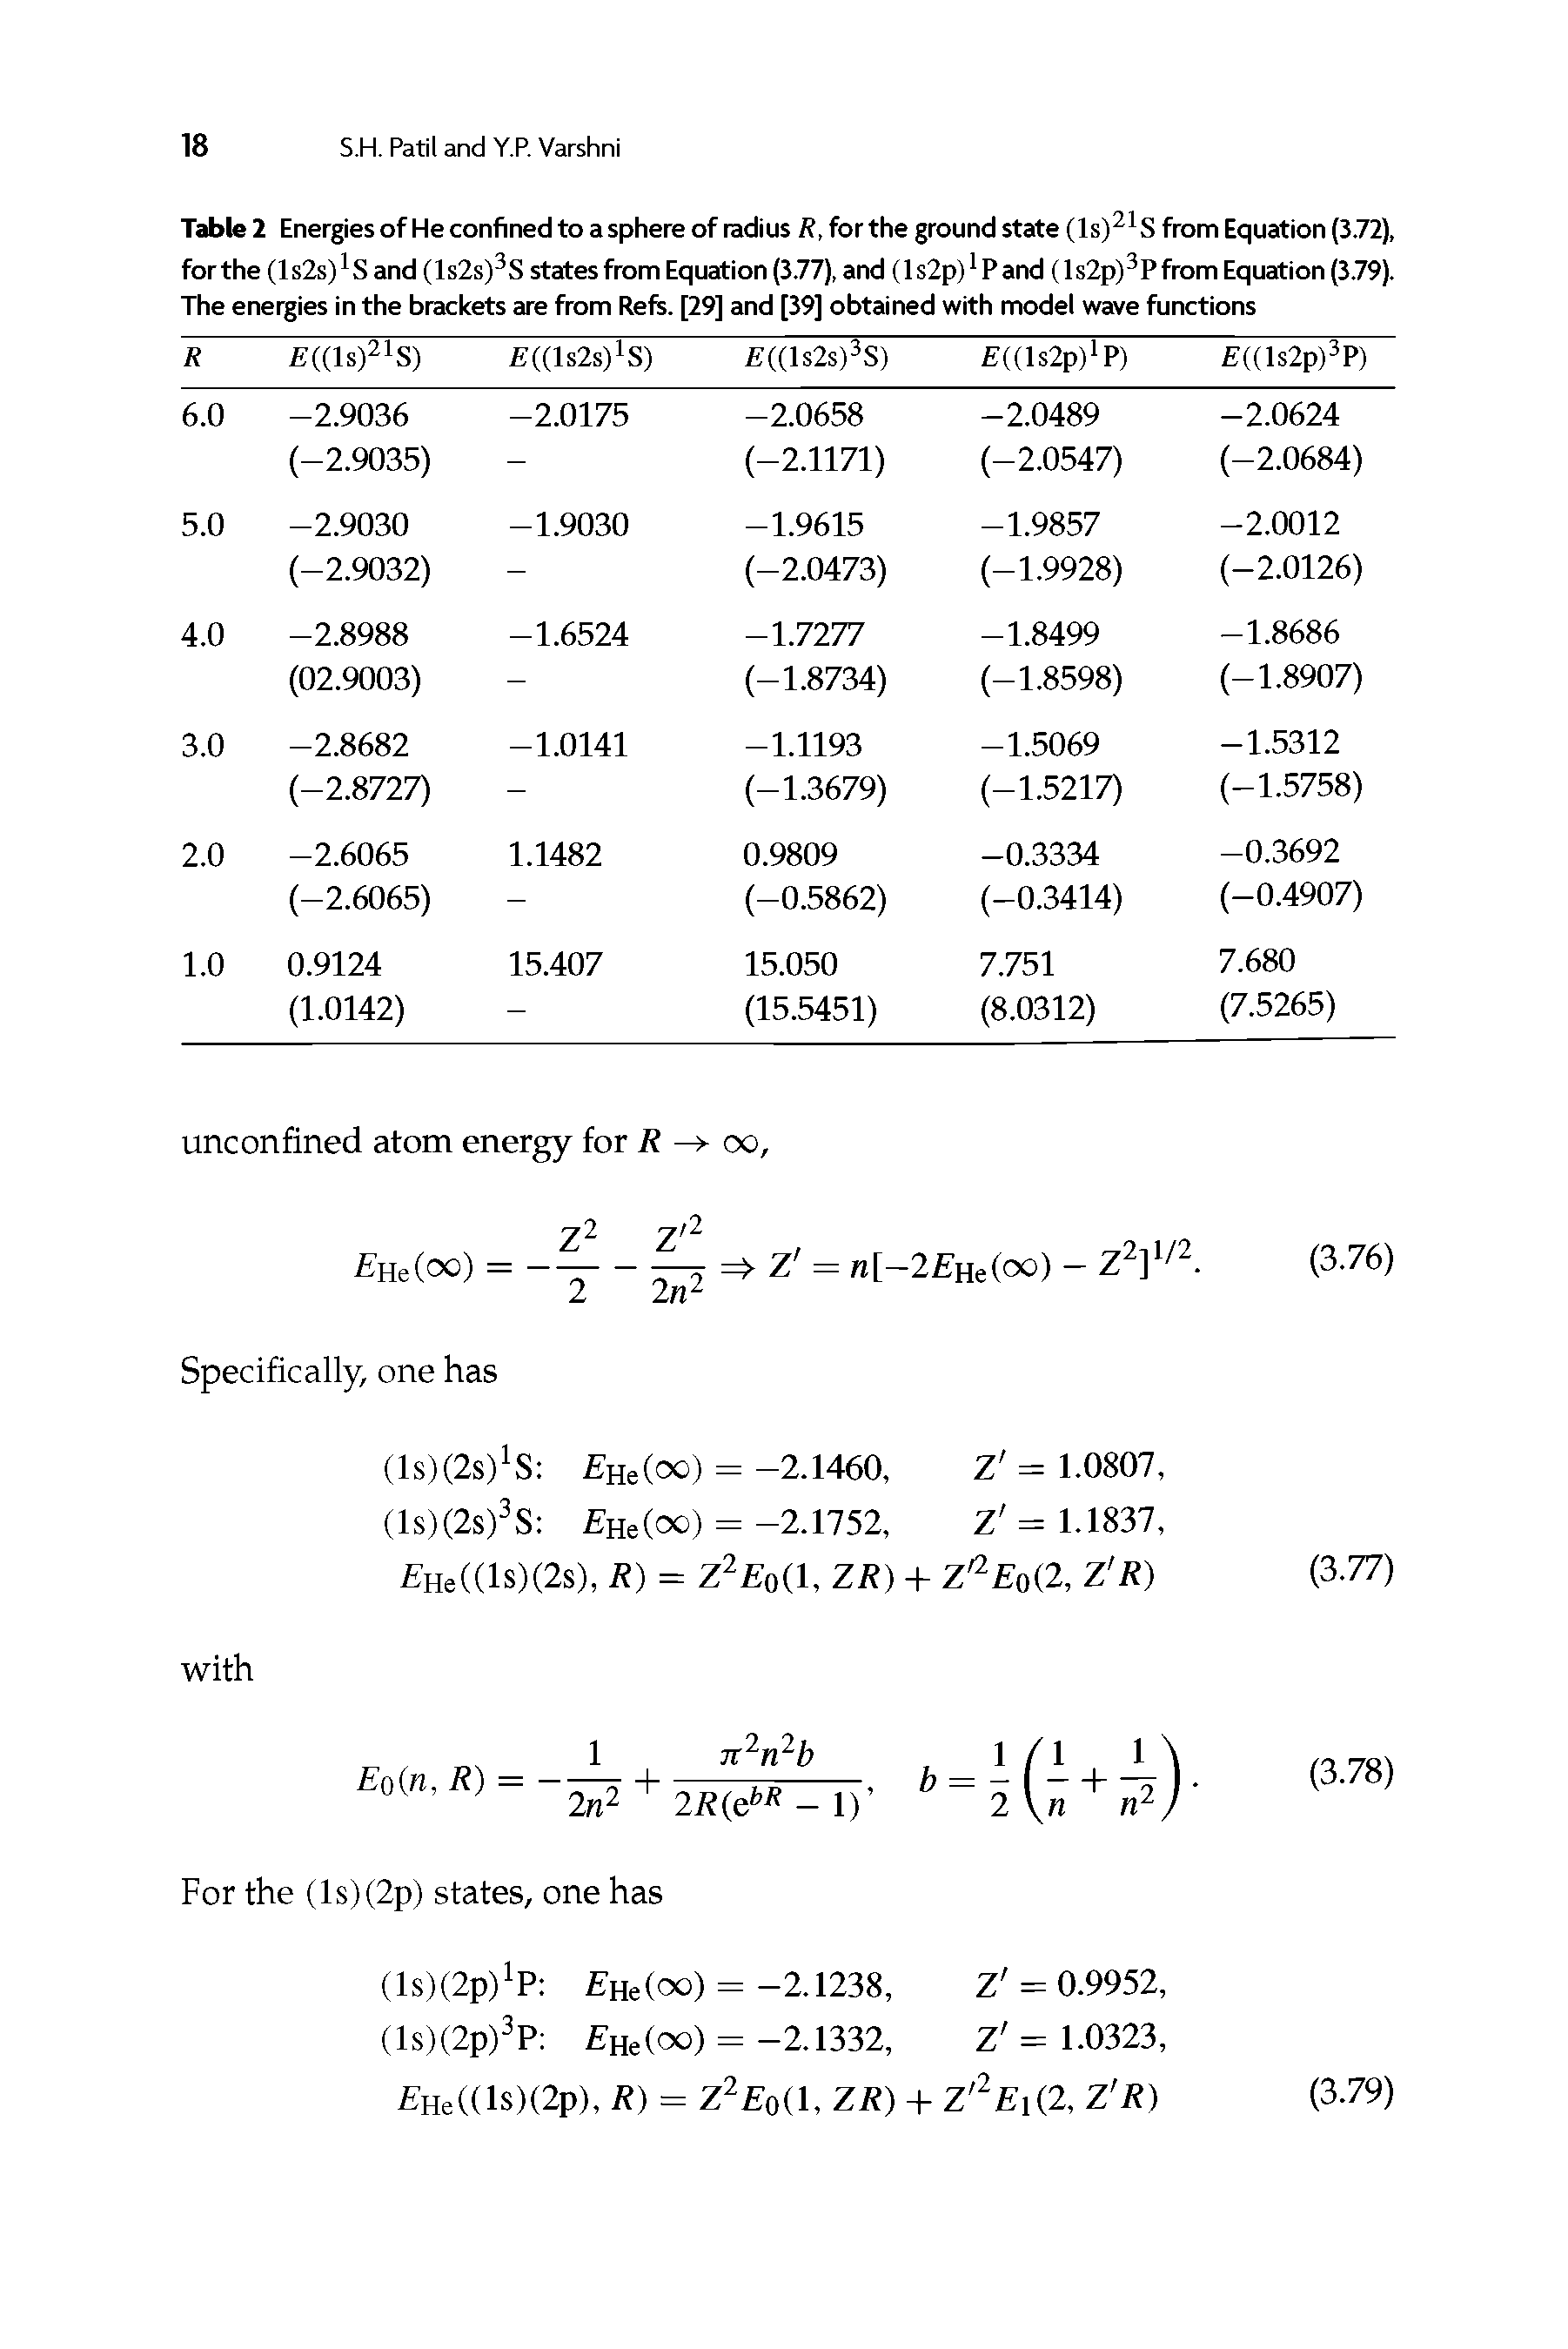 Table 2 Energies of He confined to a sphere of radius R, for the ground state (ls)21S from Equation (3.72), for the PI s2s) S and (1s2s)3S states from Equation (3.77), and (ls2p)1Pand (ls2p)3Pfrom Equation (3.79). The energies in the brackets are from Refs. [29] and [39] obtained with model wave functions...